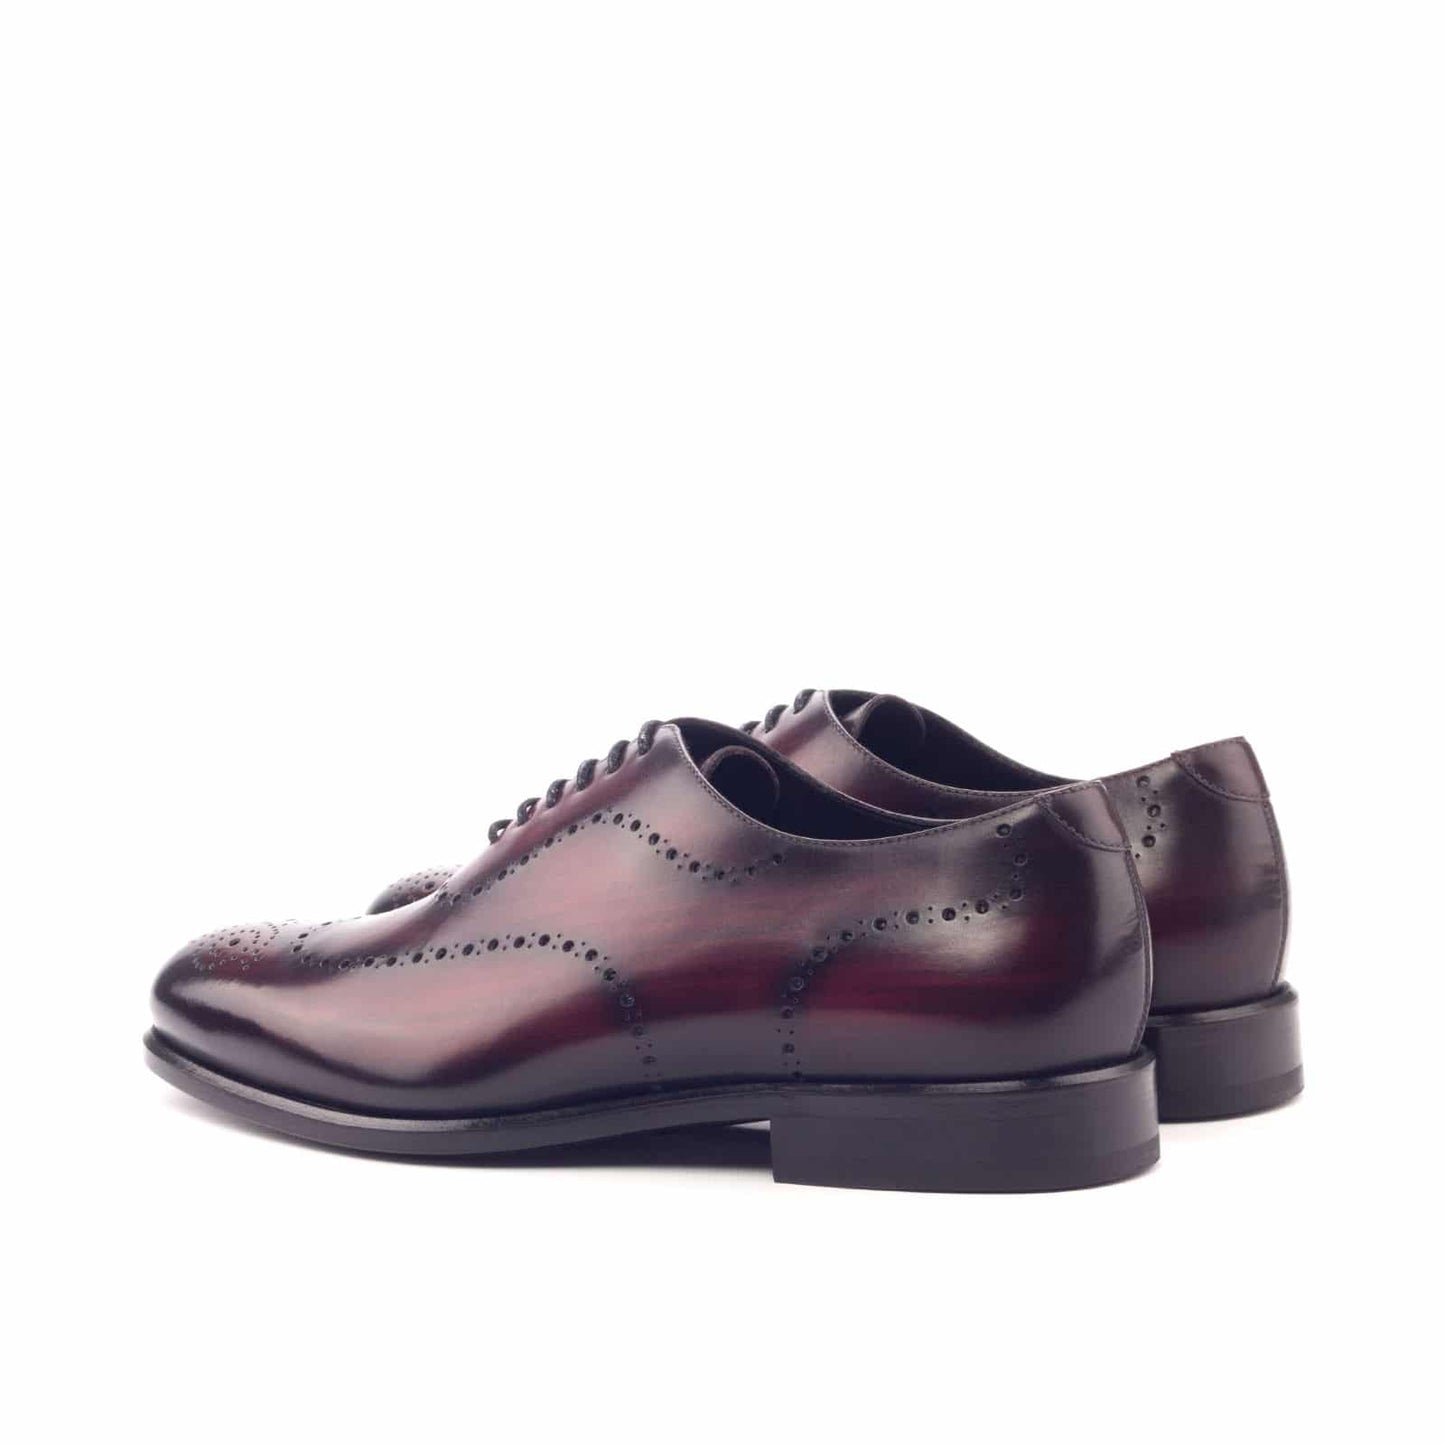 Burgundy Cherry Red Patina Finish Leather Formal Oxford Wingtip Wholecut Brogue Lace Up Shoes for Men with Leather Sole. Goodyear Welted Construction Available.